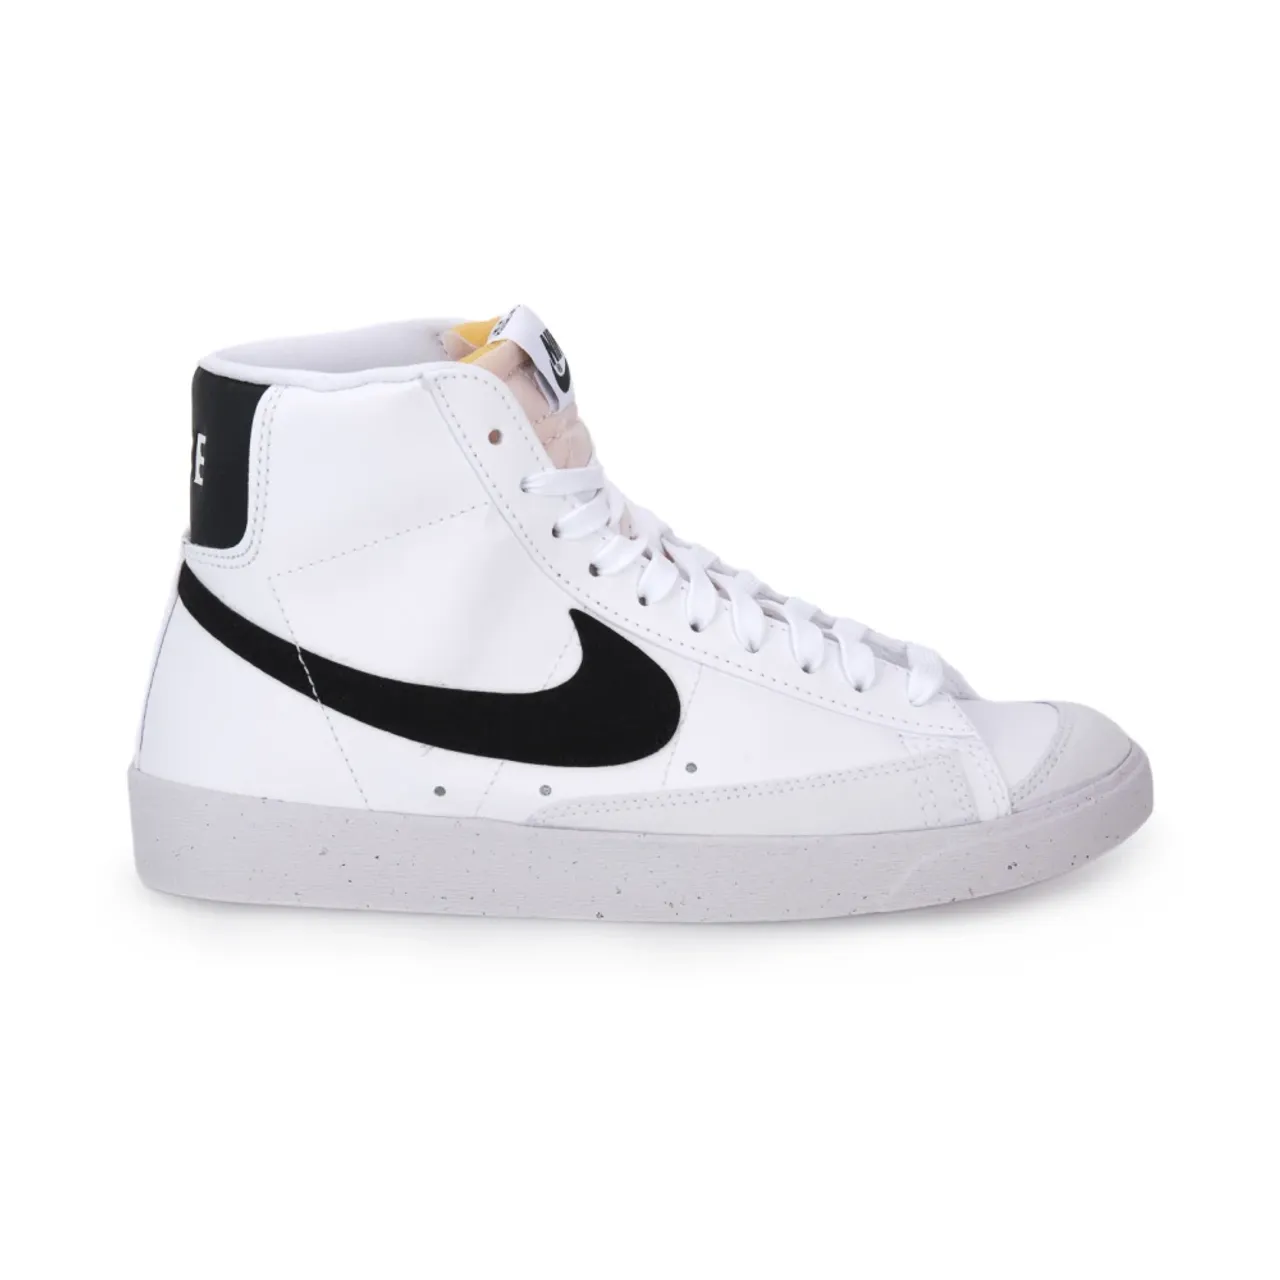 Nike , High-Quality Leather Sneakers ,White female, Sizes: